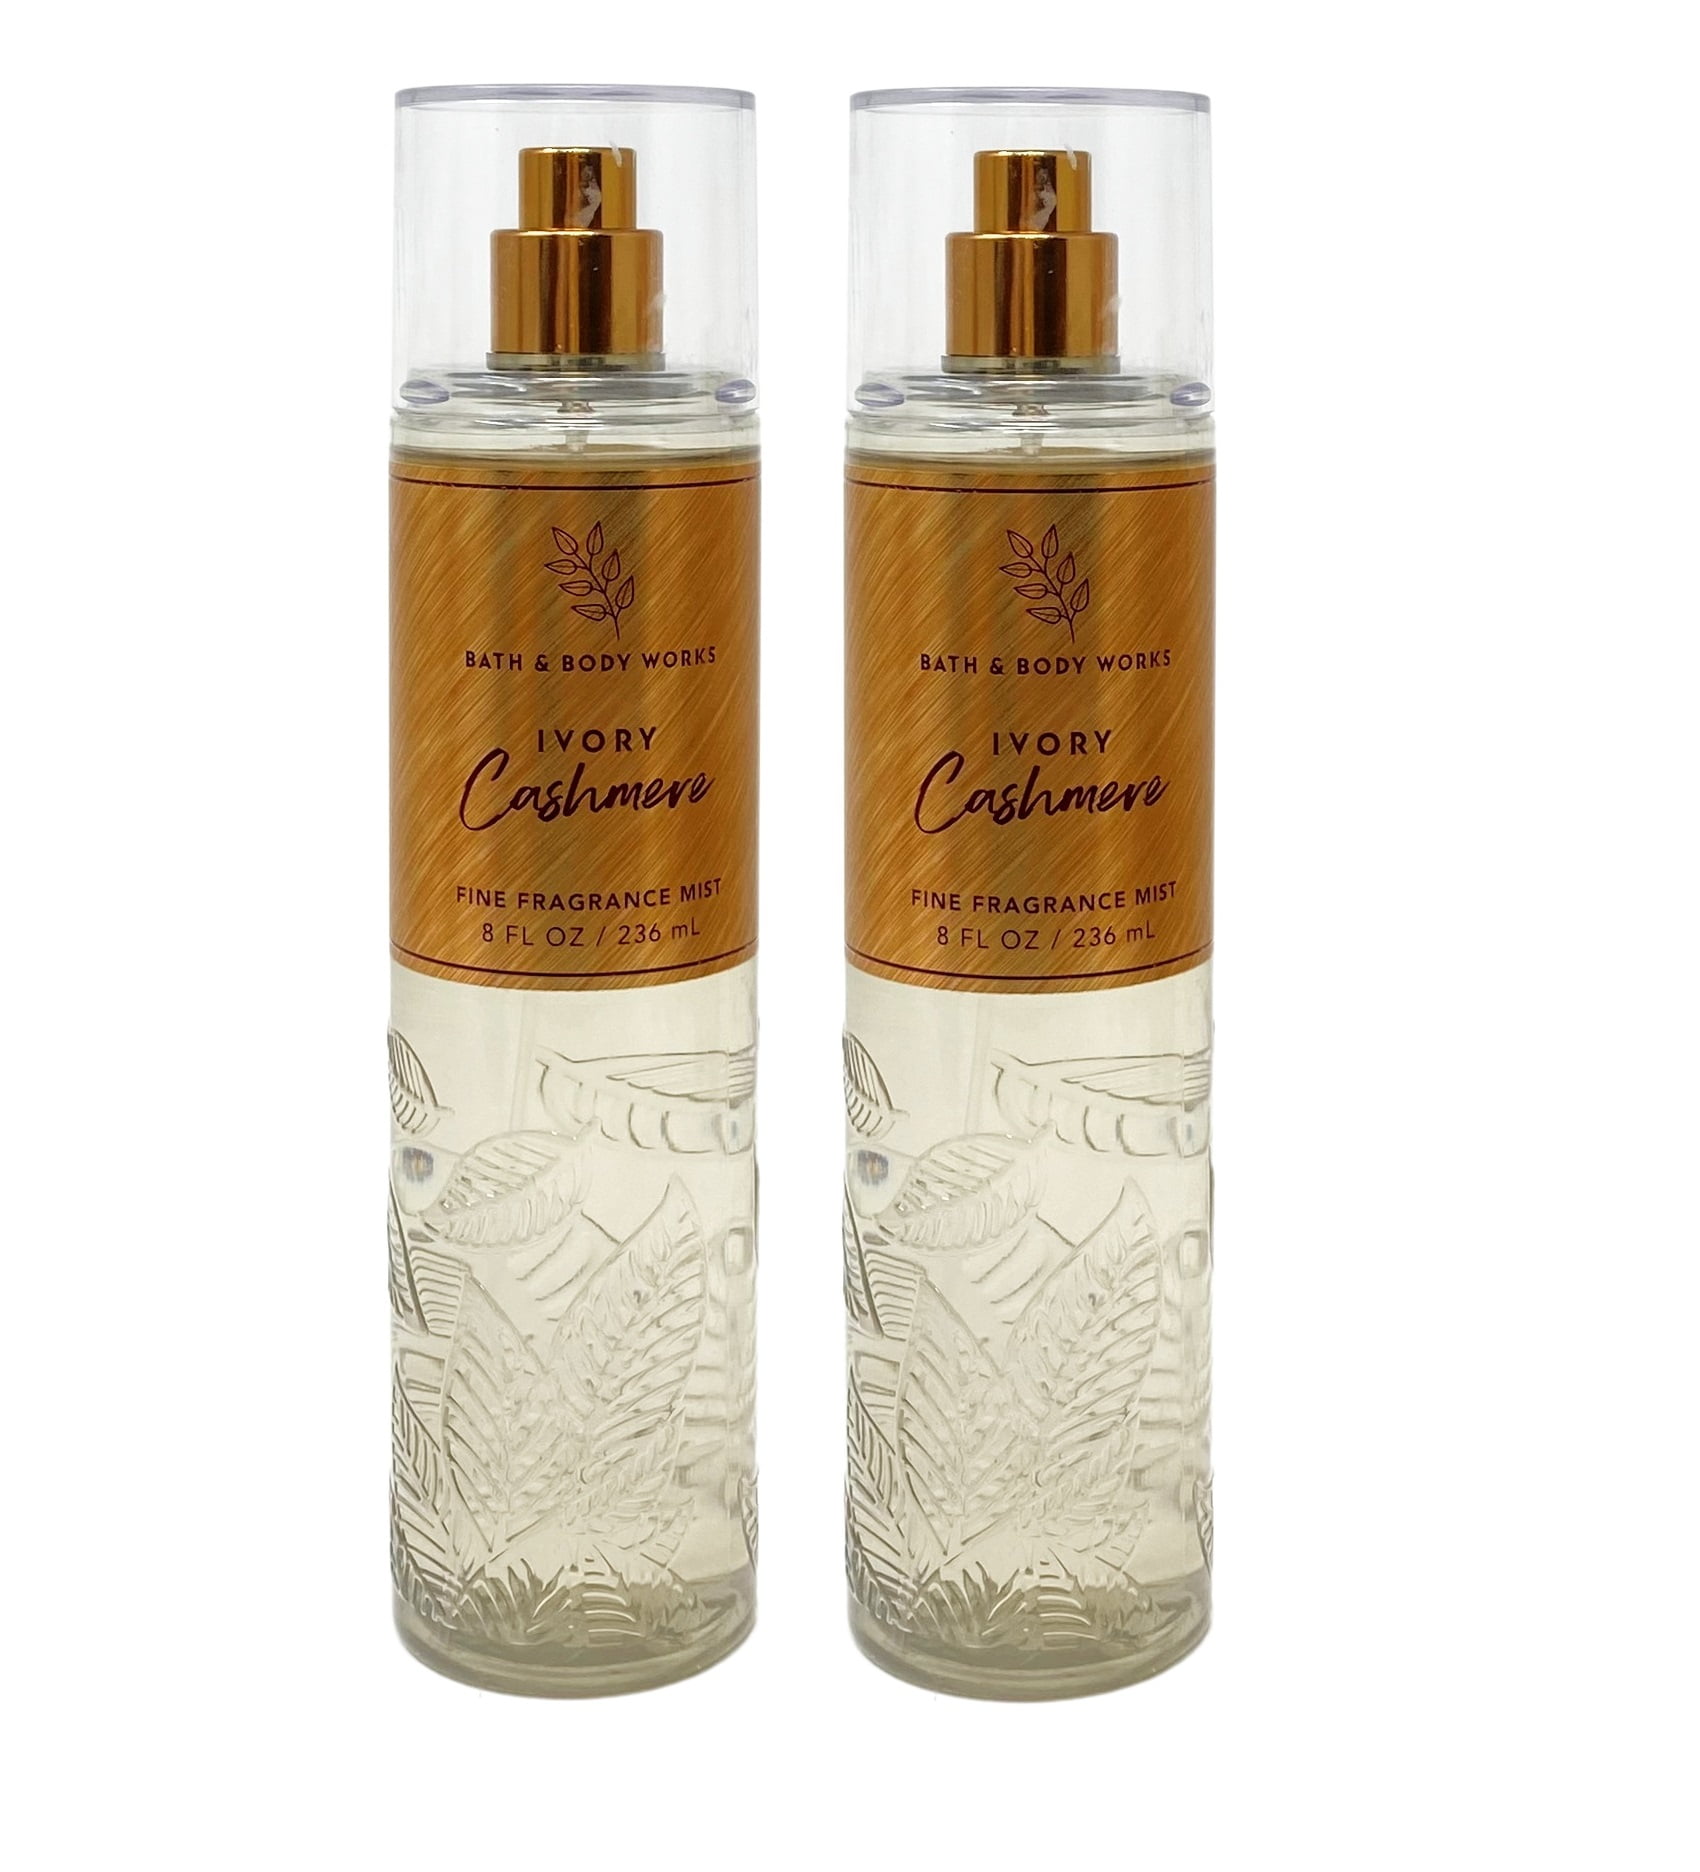 Bath and Body Works Ivory Cashmere Pack of 2 Fine Fragrance Mists - 8 fl oz  / 236 mL each